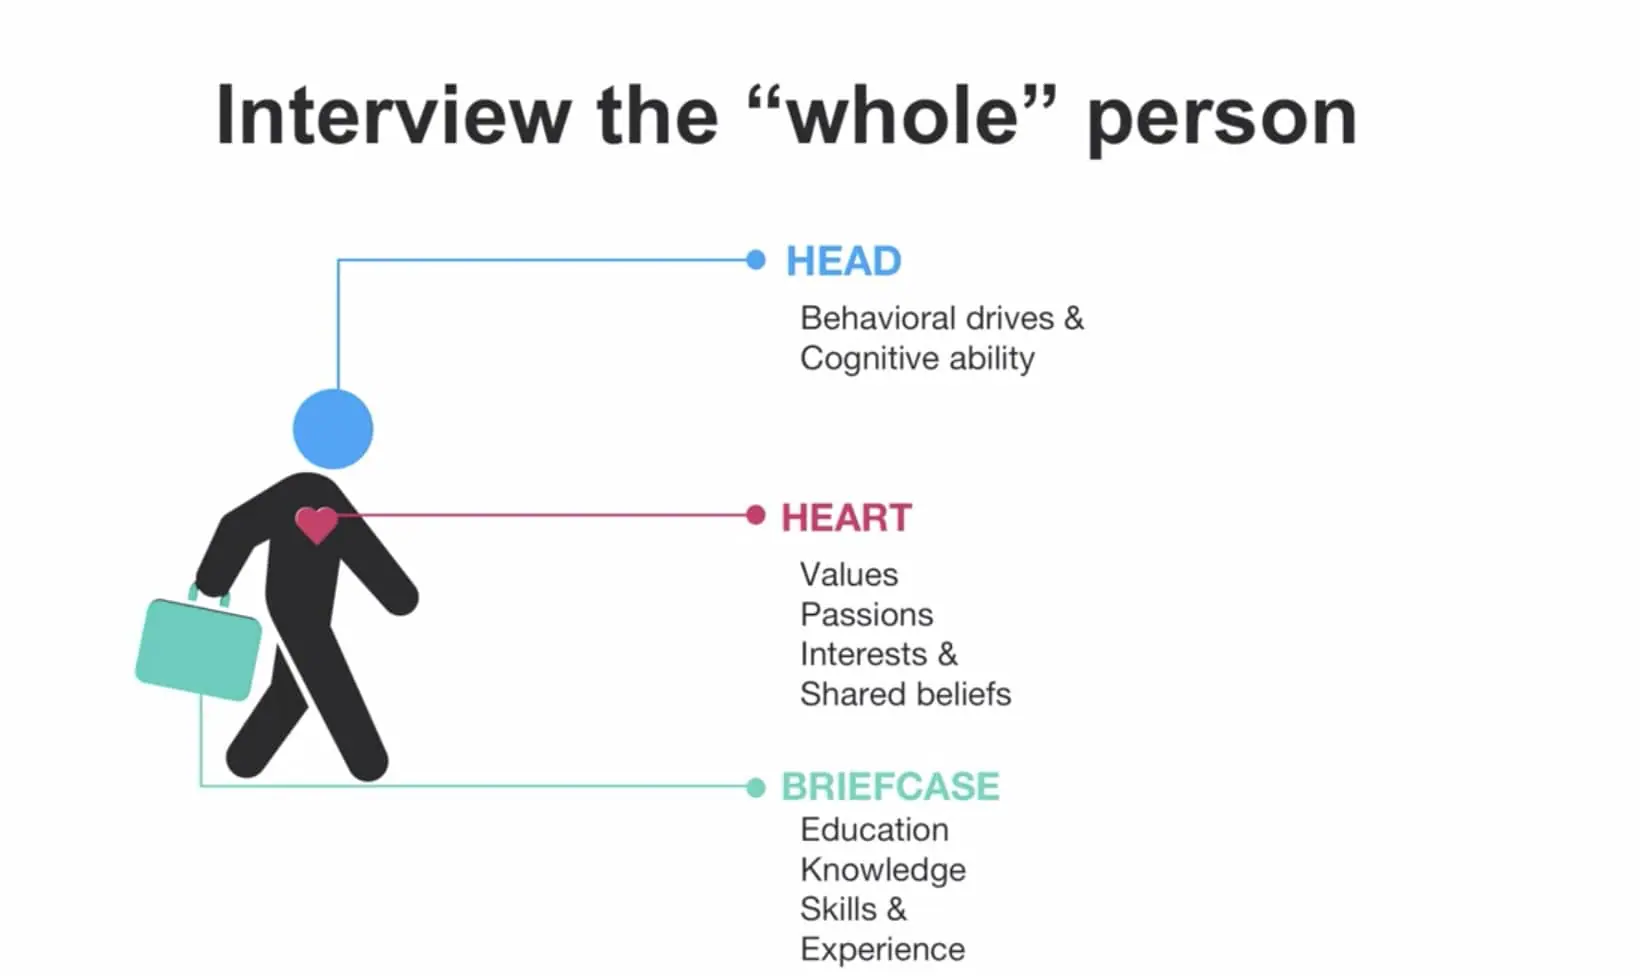 Hiring the Whole Person - the Head, Heart, & Briefcase